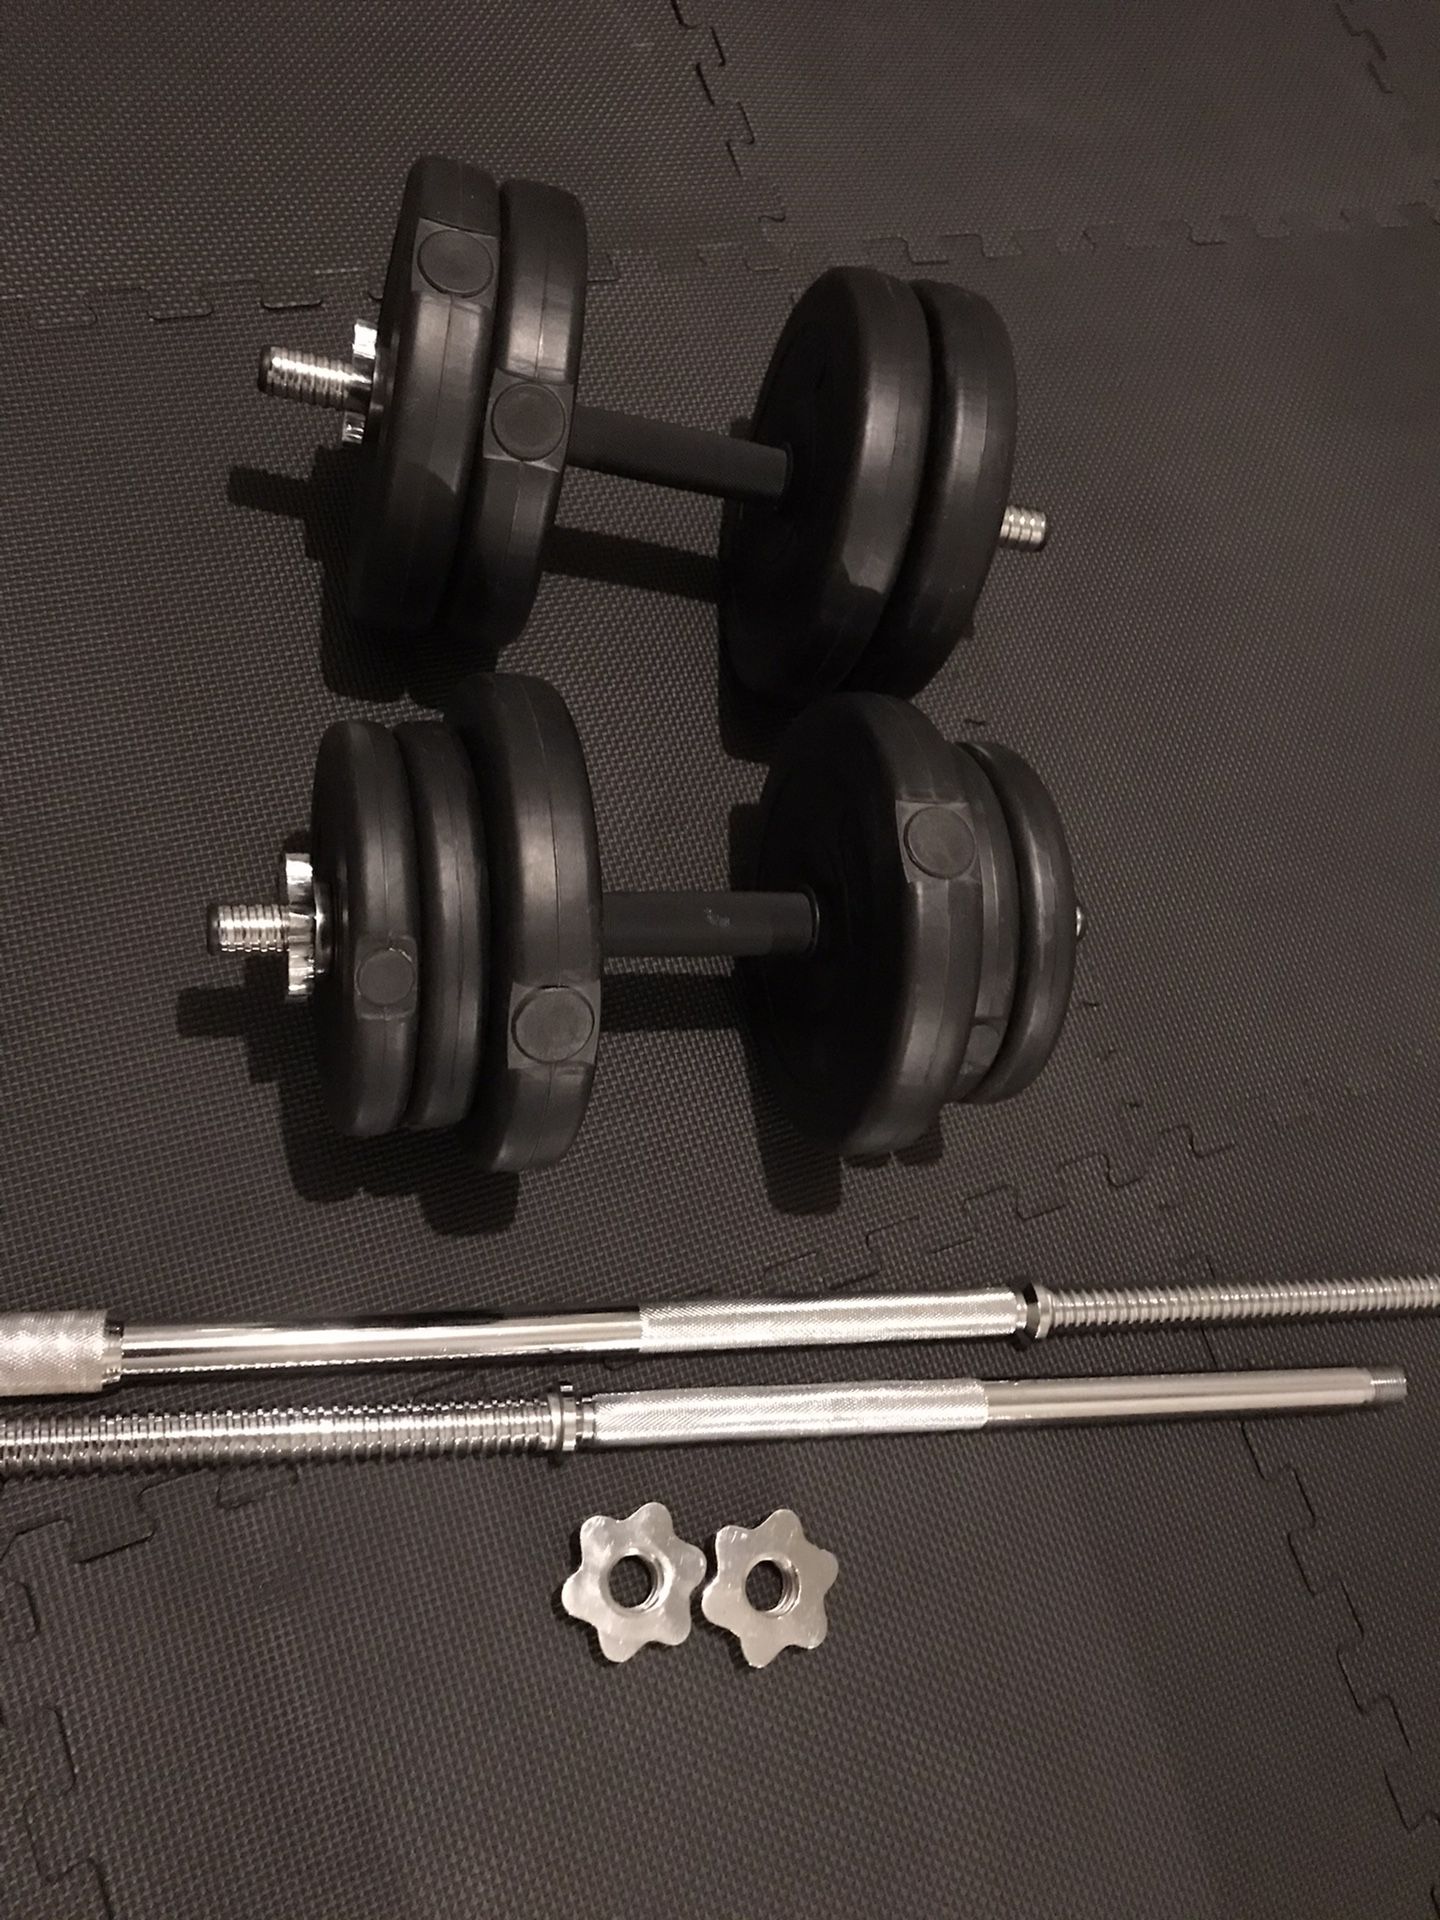 Dumbbell 85 lbs weights set